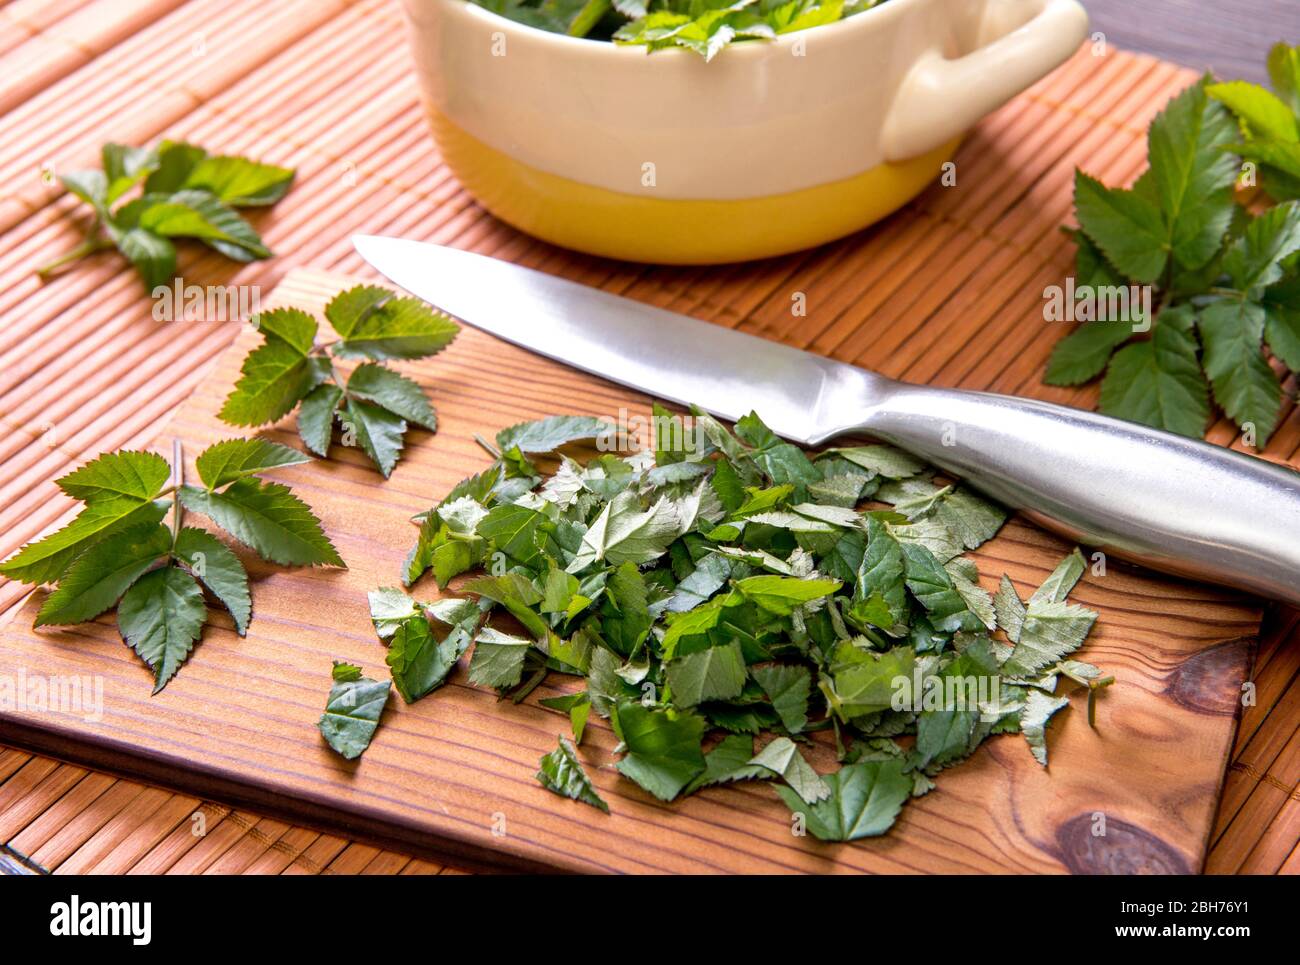 Using fresh young goutweed leaves for food in spring. Aegopodium podagraria commonly called ground elder, herb gerard, bishop's weed, gout wort. Stock Photo